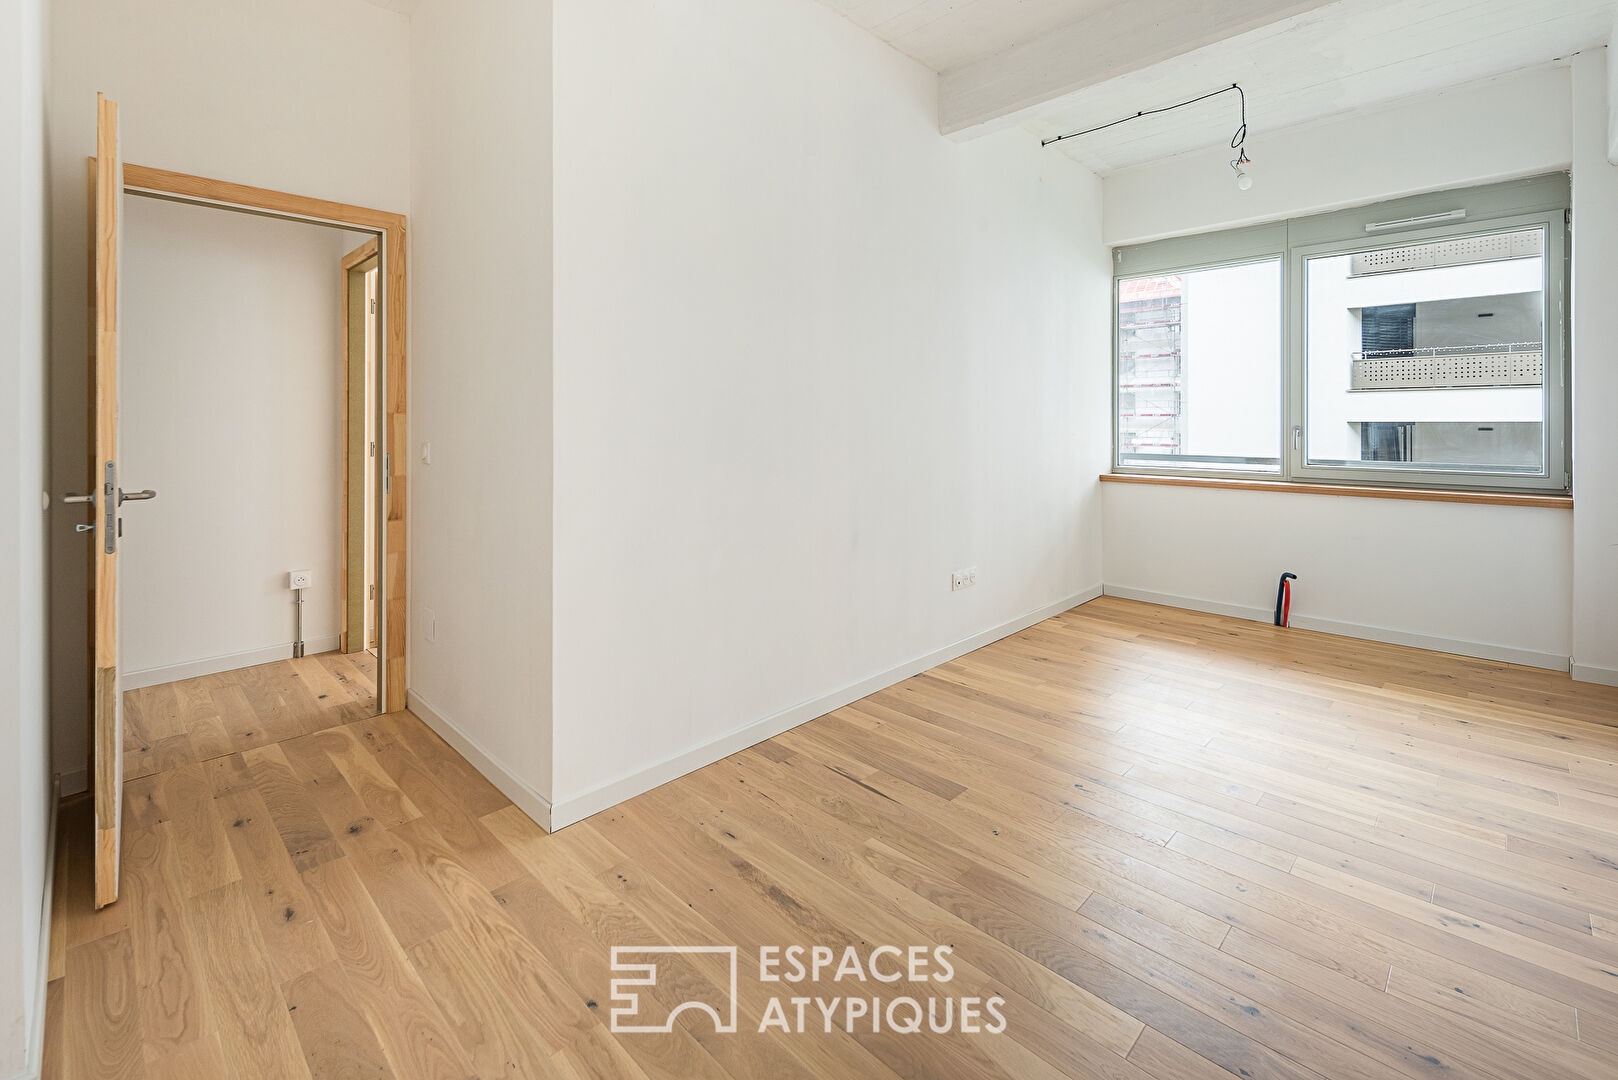 Already rented : Duplex apartment and terrace in the heart of Les Deux Rives